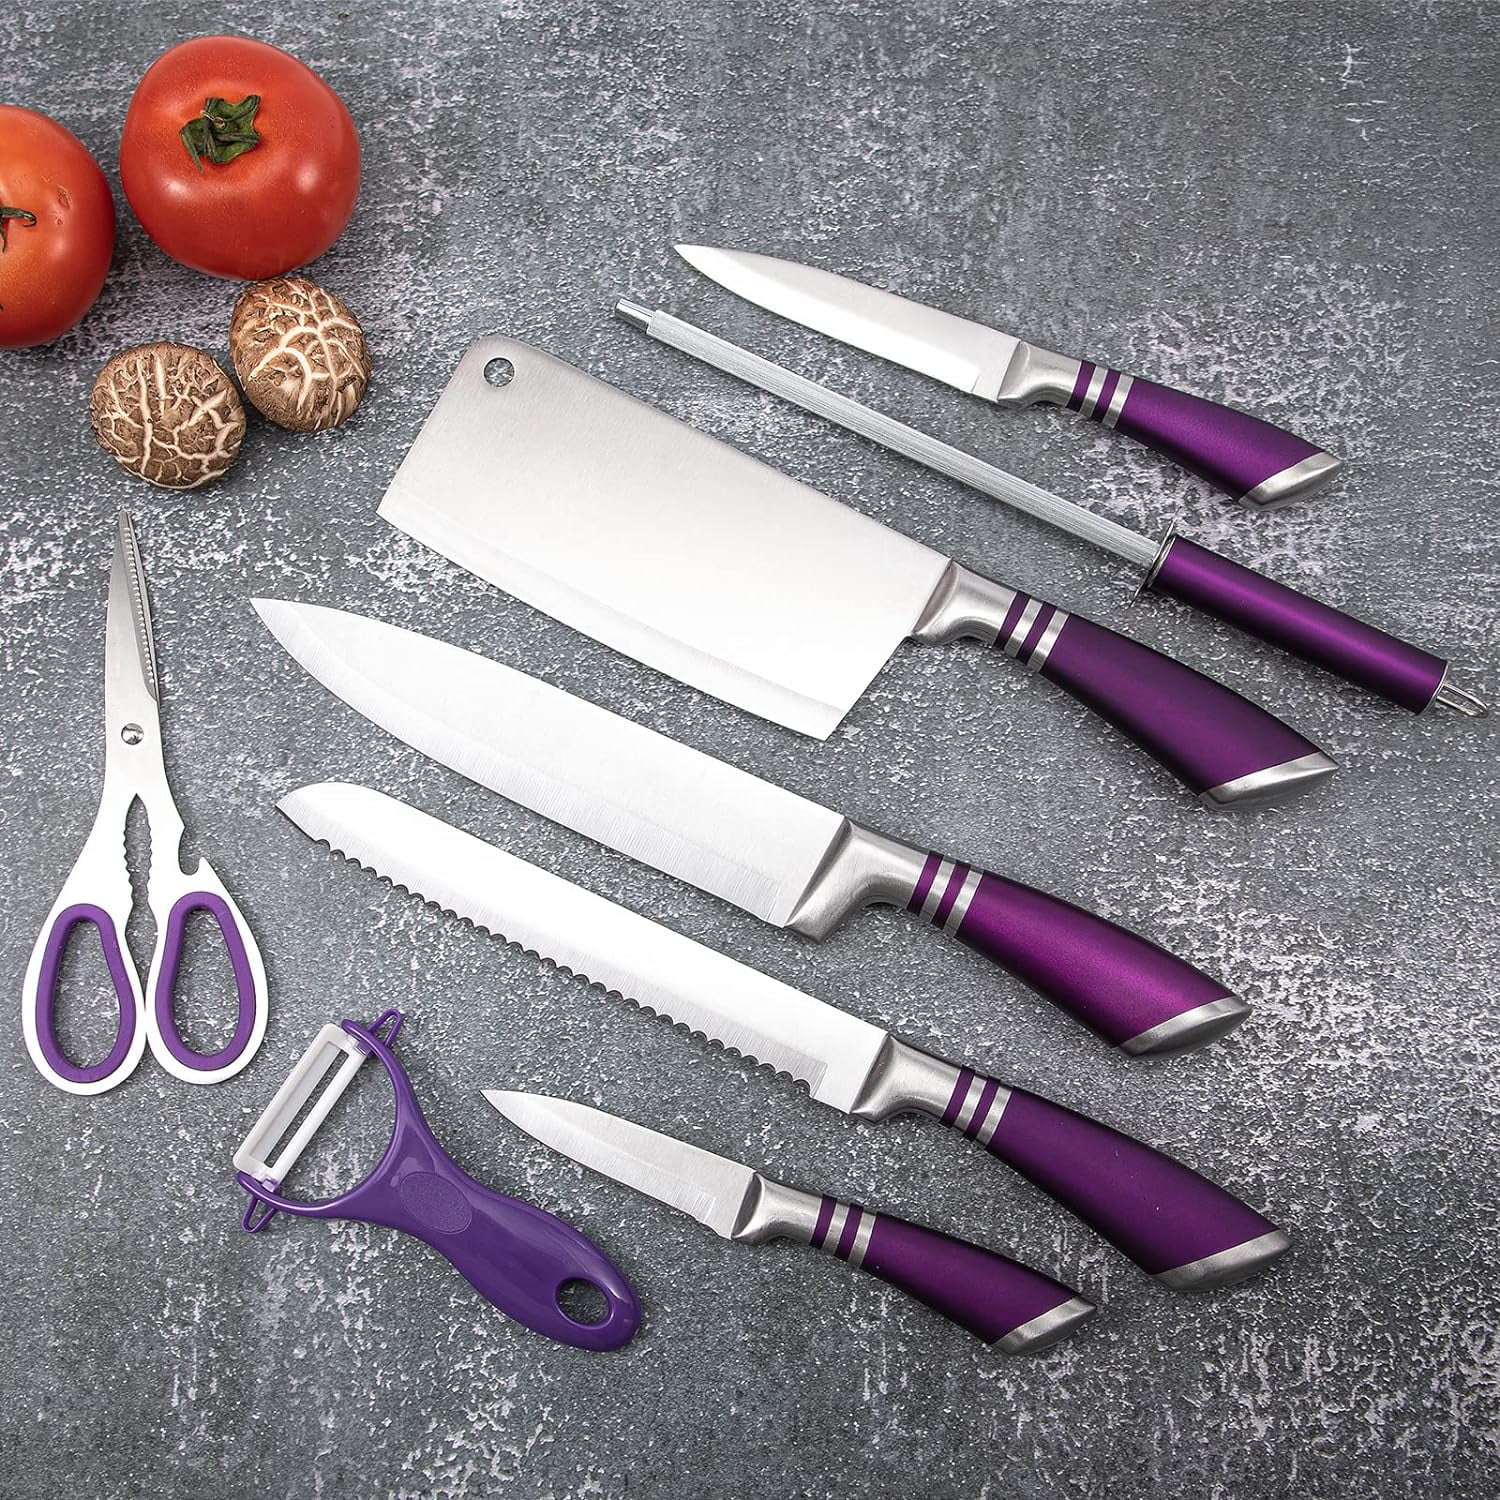 PurpleChef 10 Pieces Purple Galaxy Kitchen Knives Set. Includes 6 Stainless  Steel Knives, Scissors, Knife Sharpener, Peeler, and Clear Acrylic Stand.